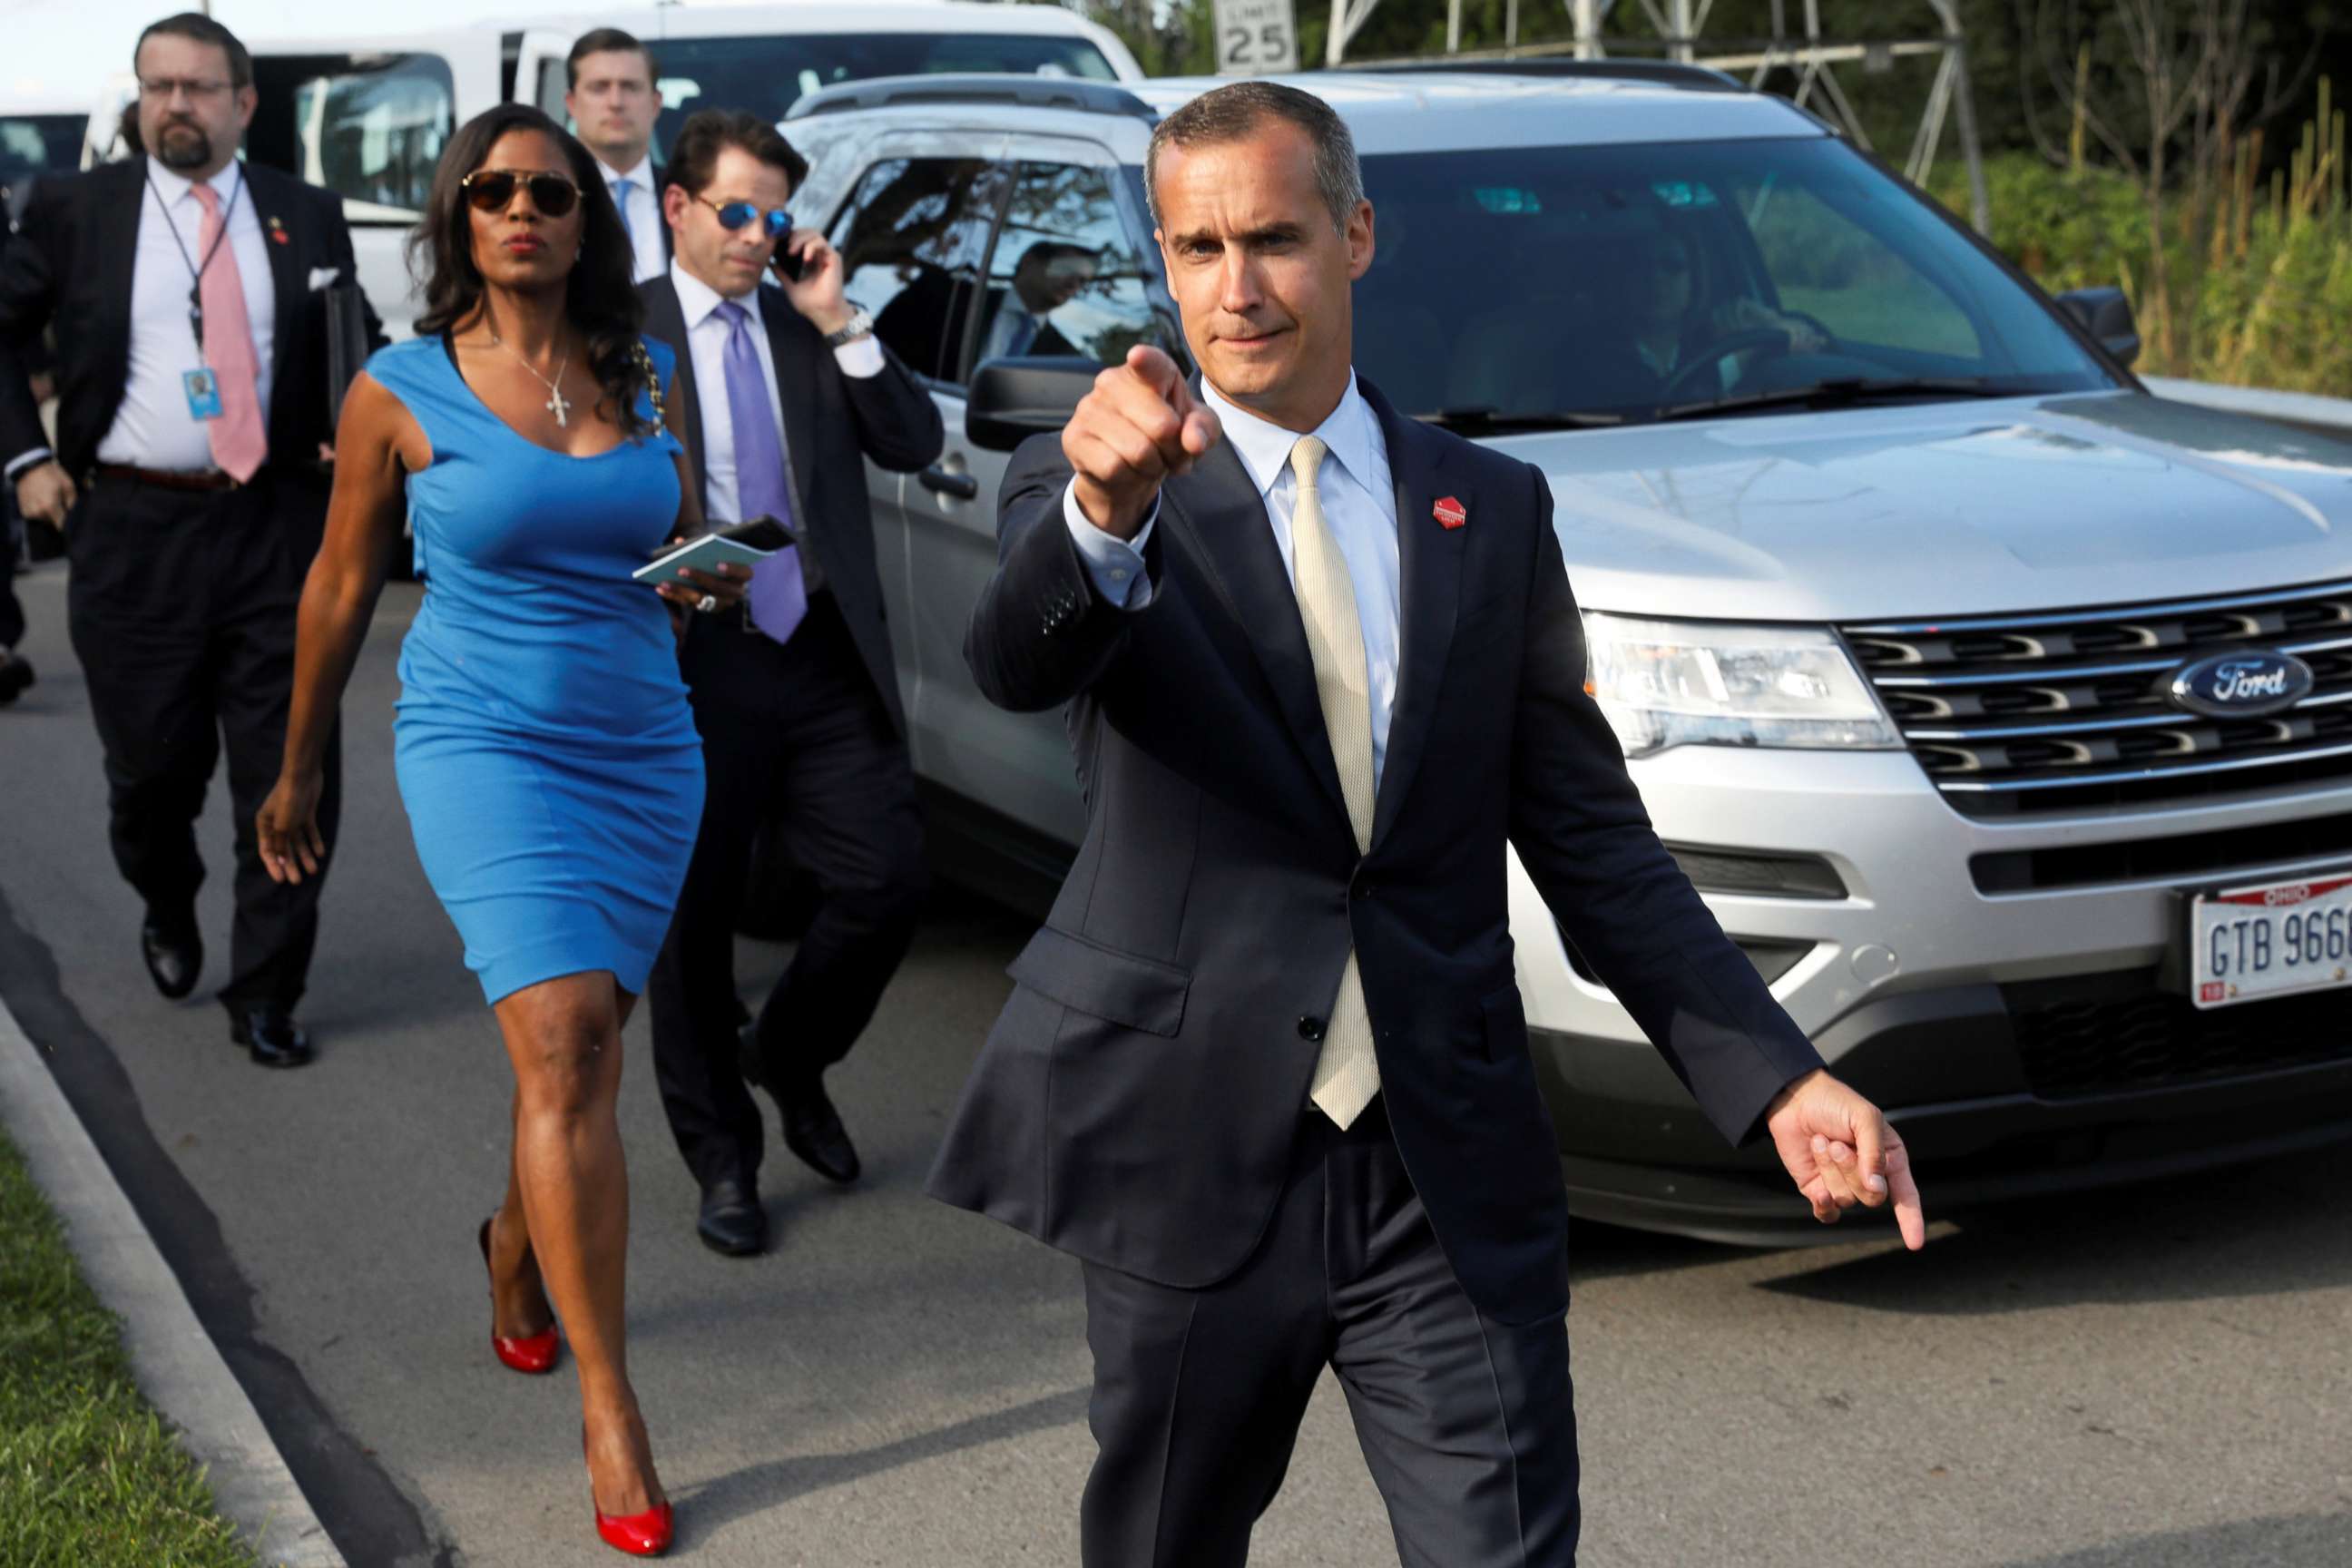 PHOTO: Former campaign manager Corey Lewandowski, right, and White House advisors (L-R) Sebastian Gorka, Omarosa Manigault and Communications Director Anthony Scaramucci accompany President Trump for an event in Struthers, Ohio, July 25, 2017. 